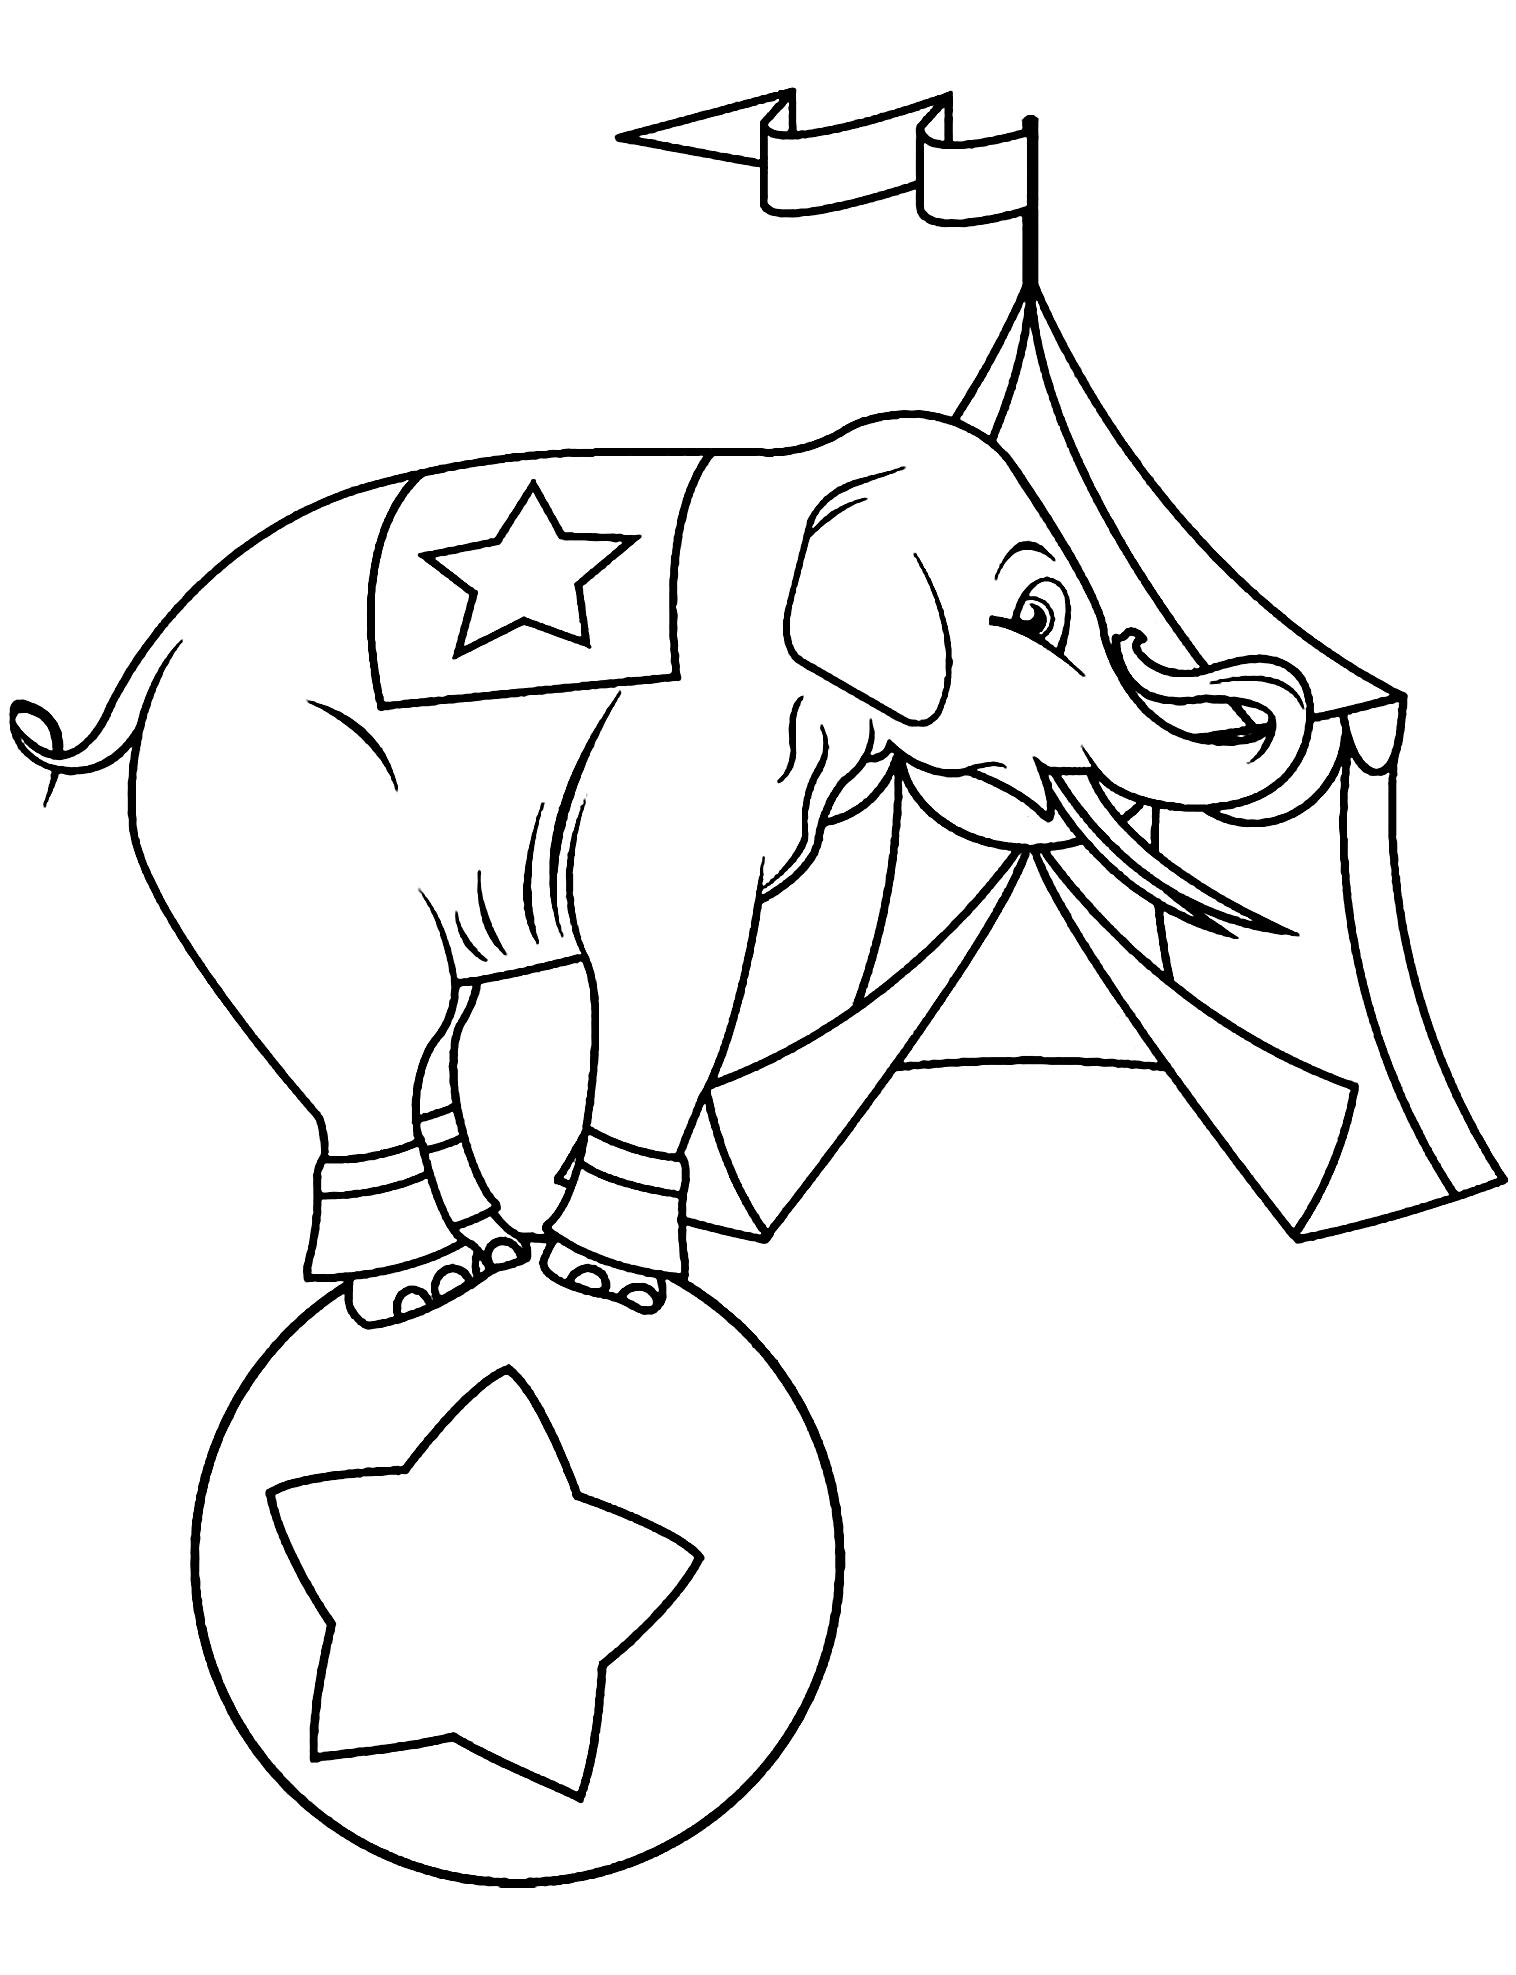 Circus coloring pages for kids - Circus Kids Coloring Pages